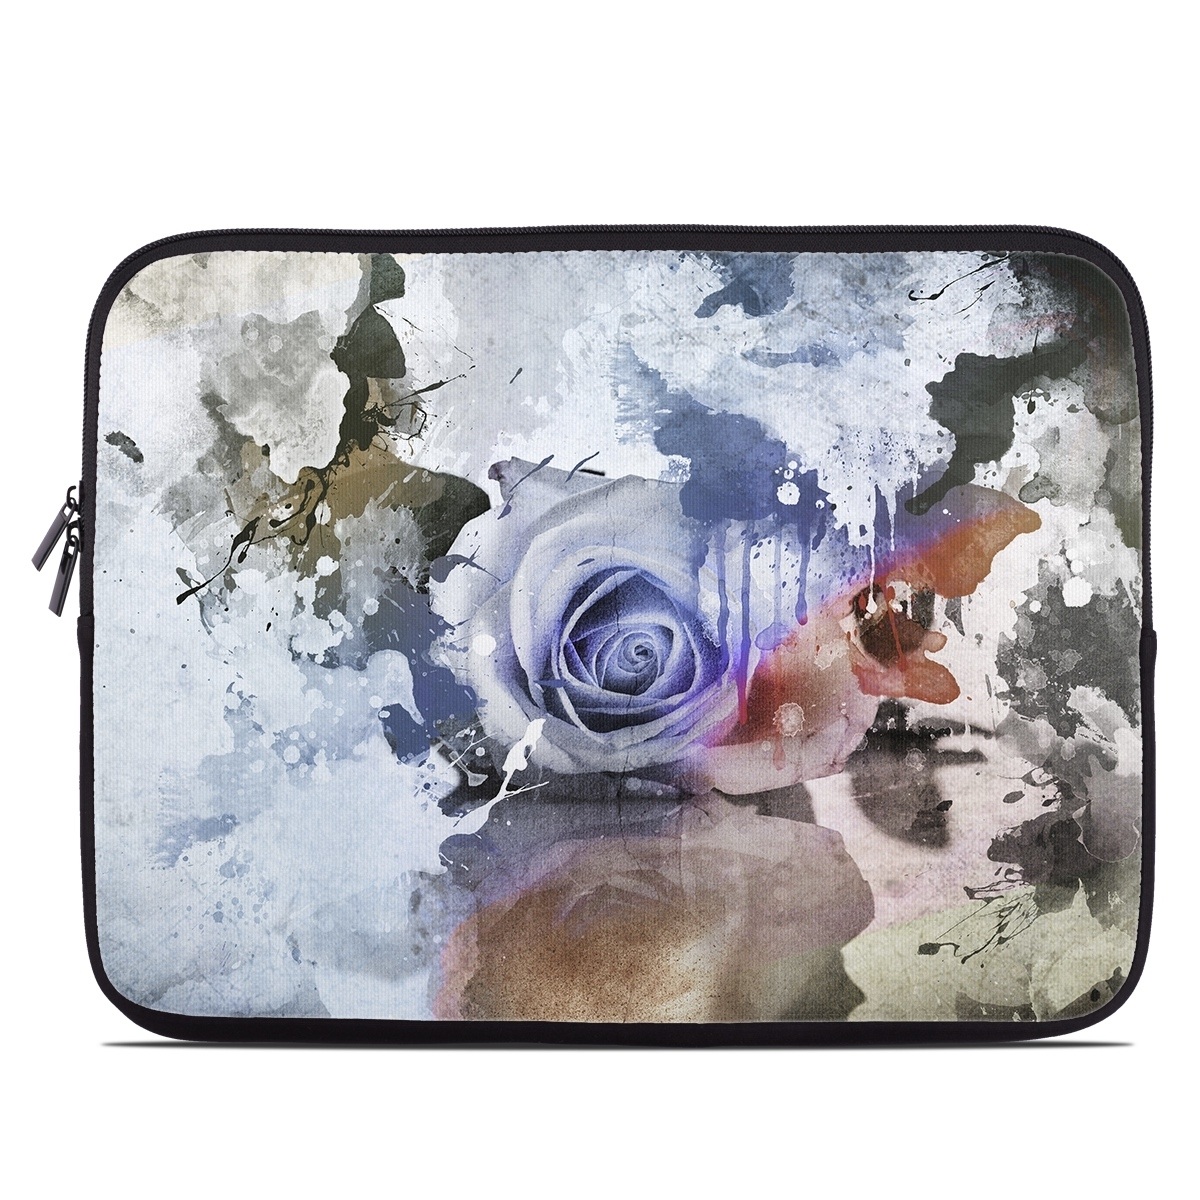 Laptop Sleeve - Days Of Decay (Image 1)